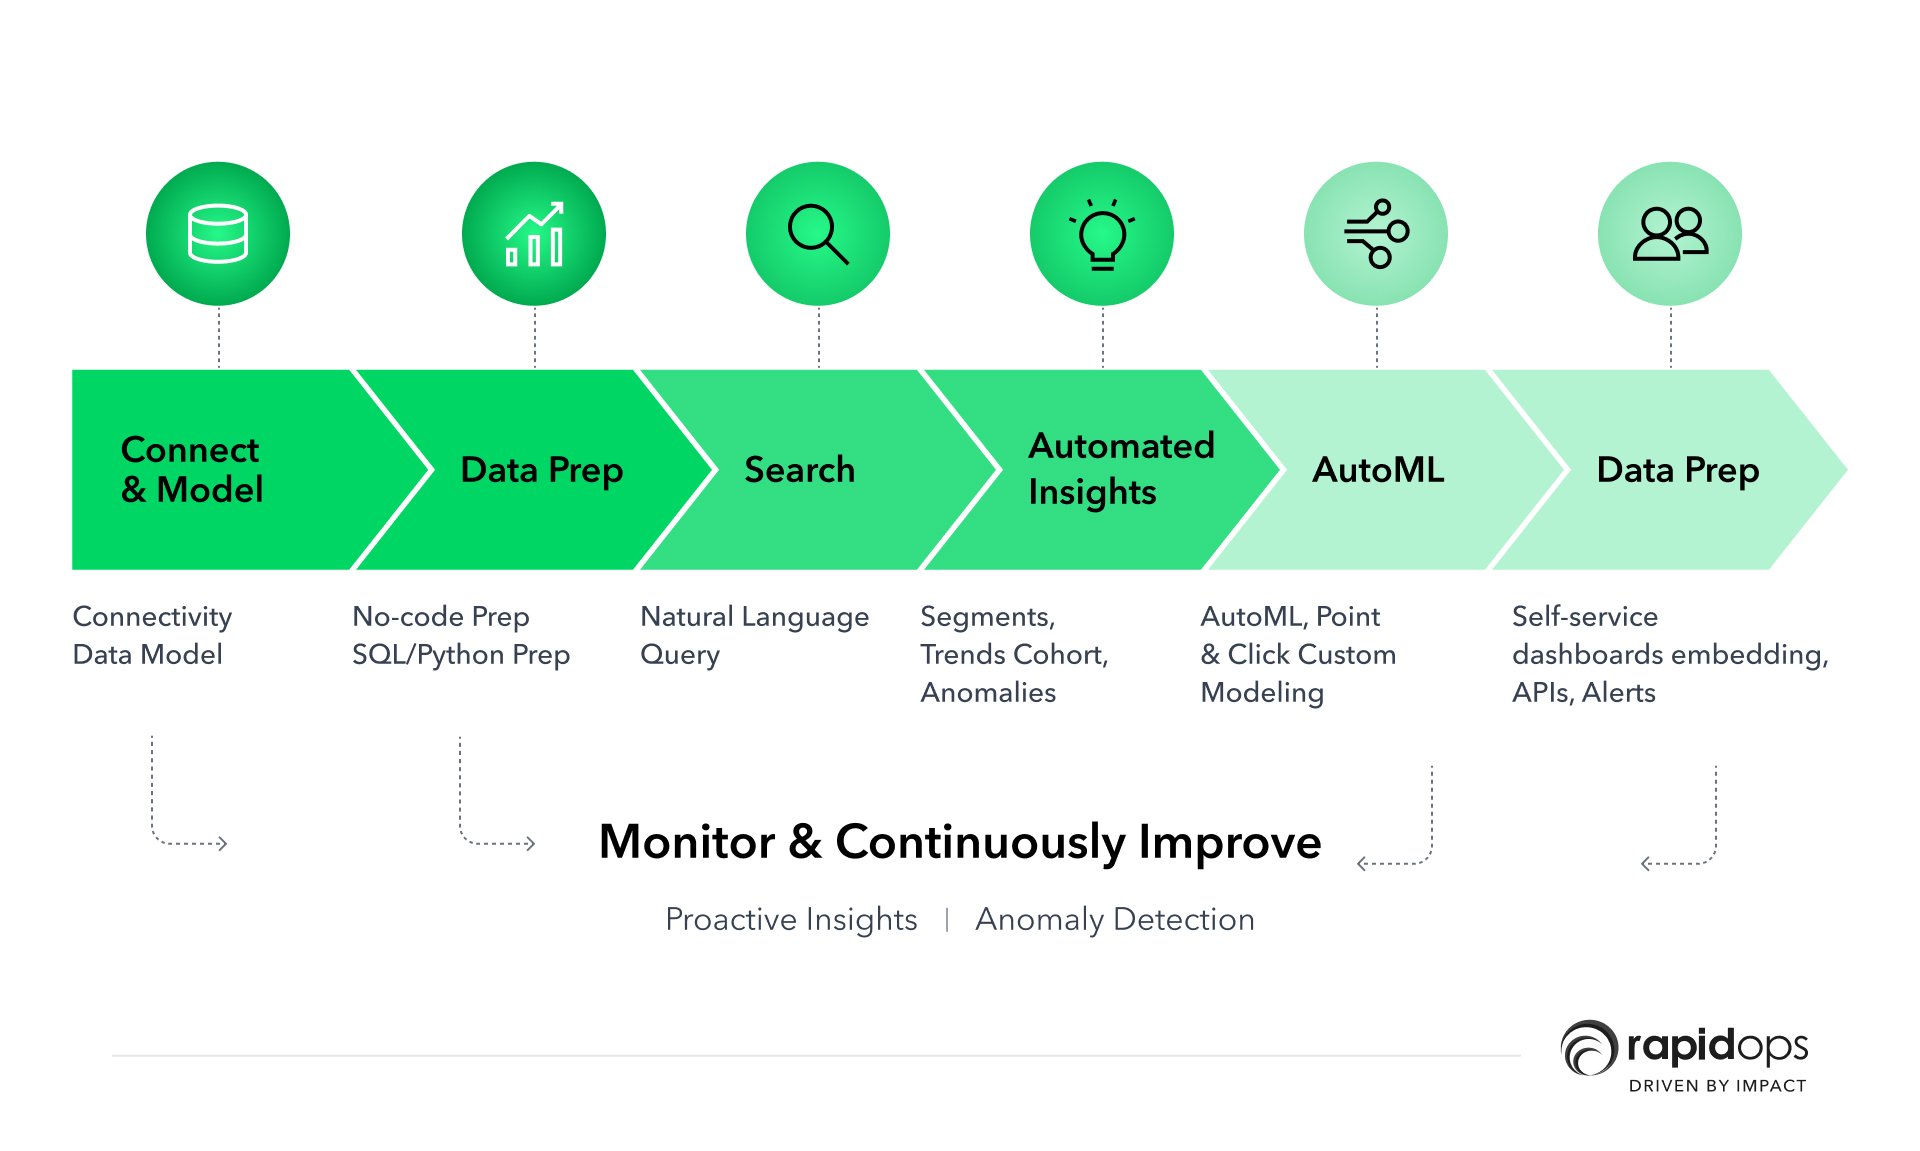 Monitor & Continuously Improve